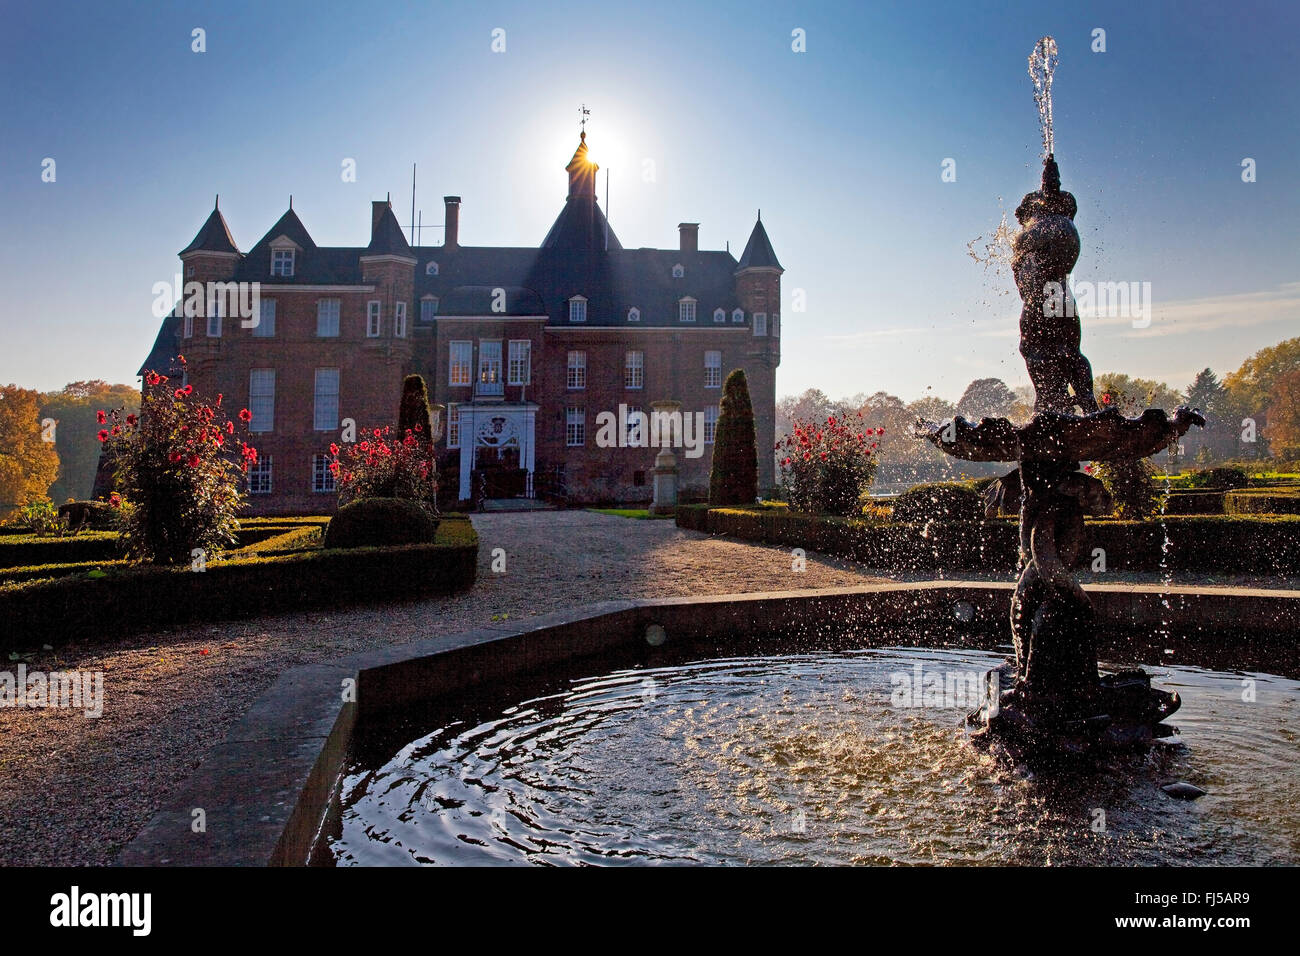 fountain on front of castle Anholt, French formal garden, Germany, North Rhine-Westphalia, Muensterland, Isselburg-Anholt Stock Photo